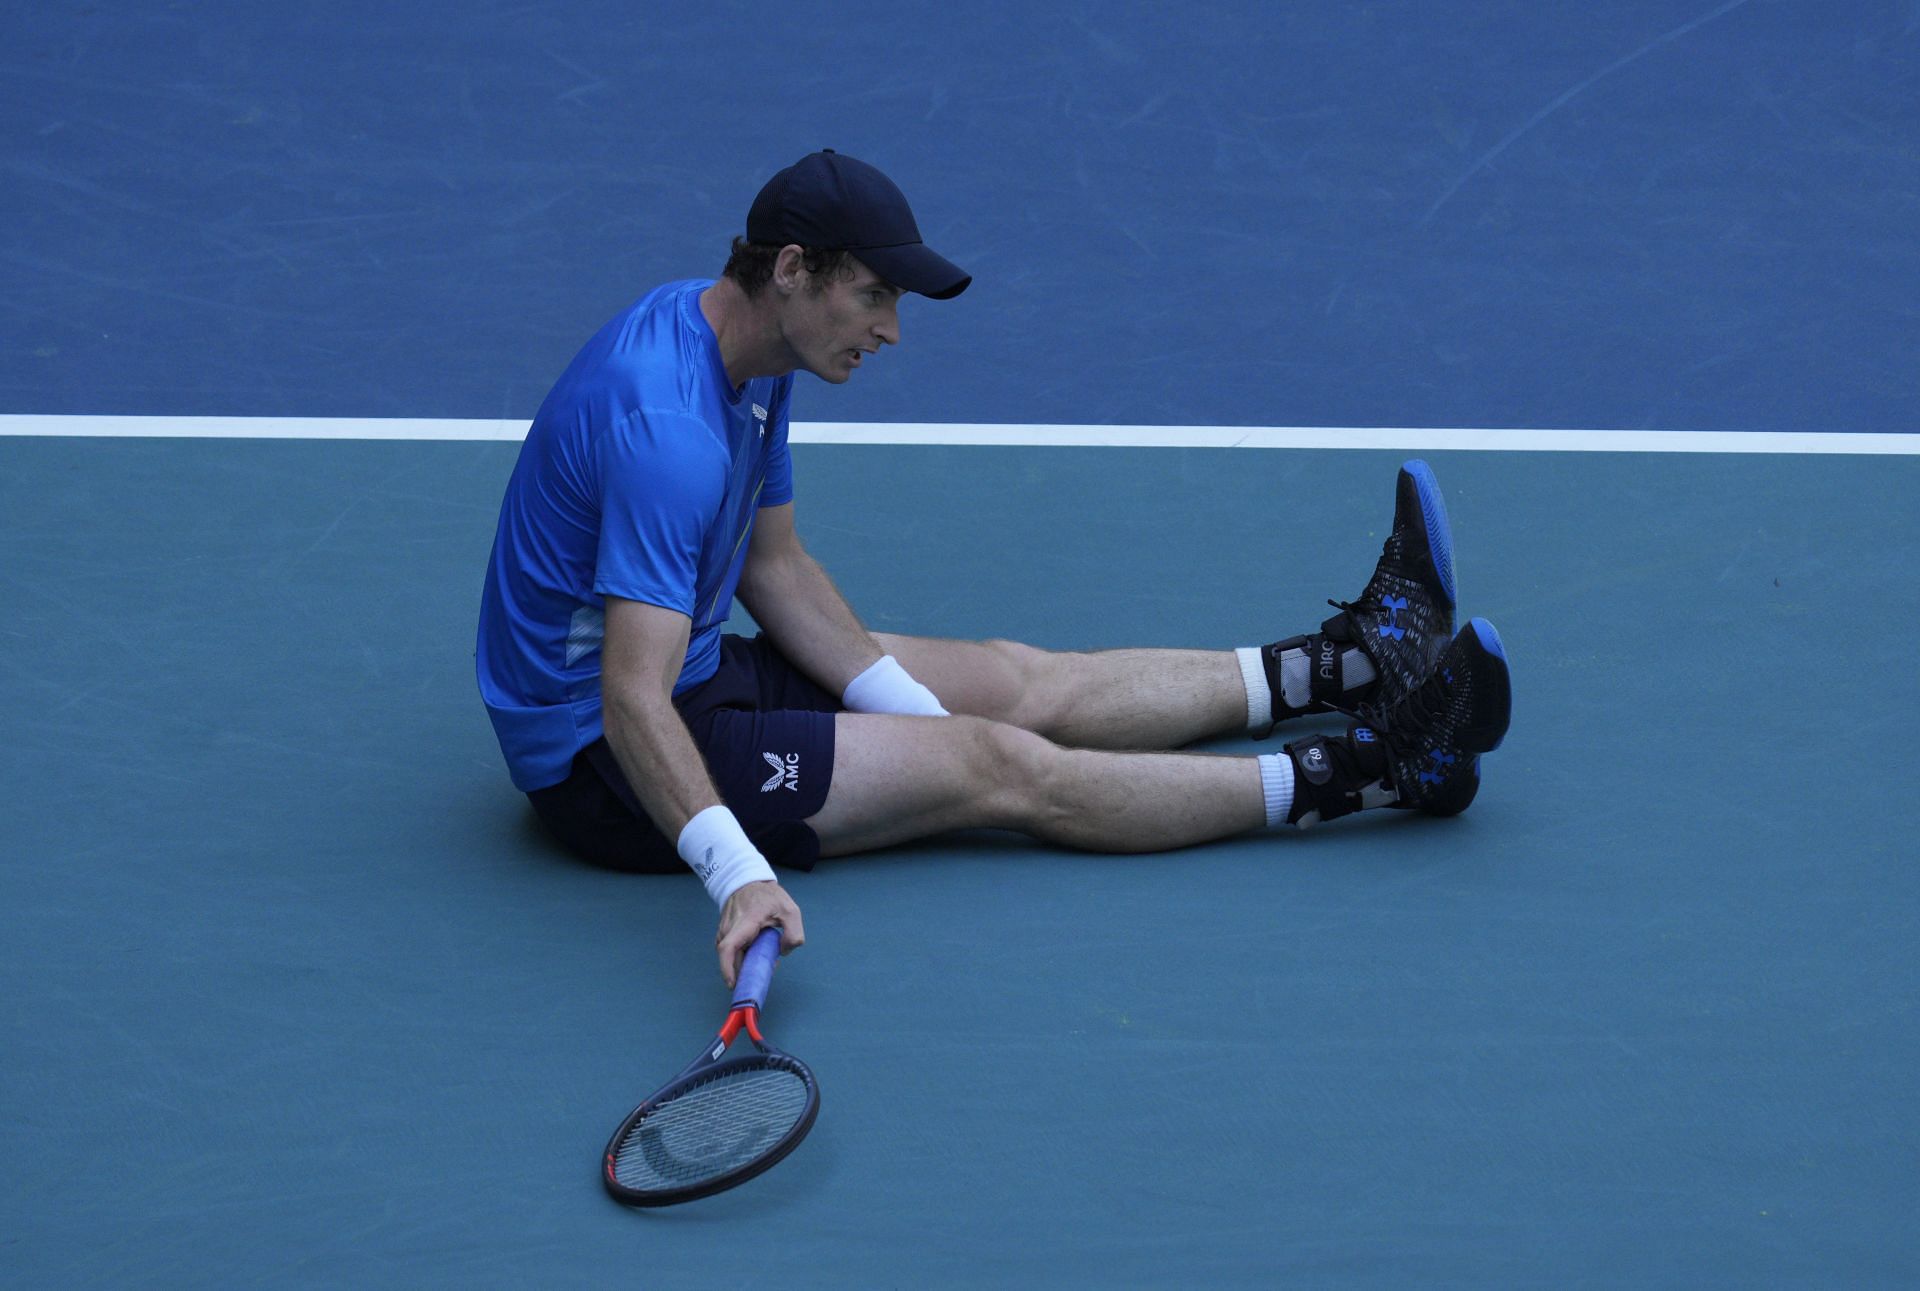 Murray has been criticized for recieving too many wildcards